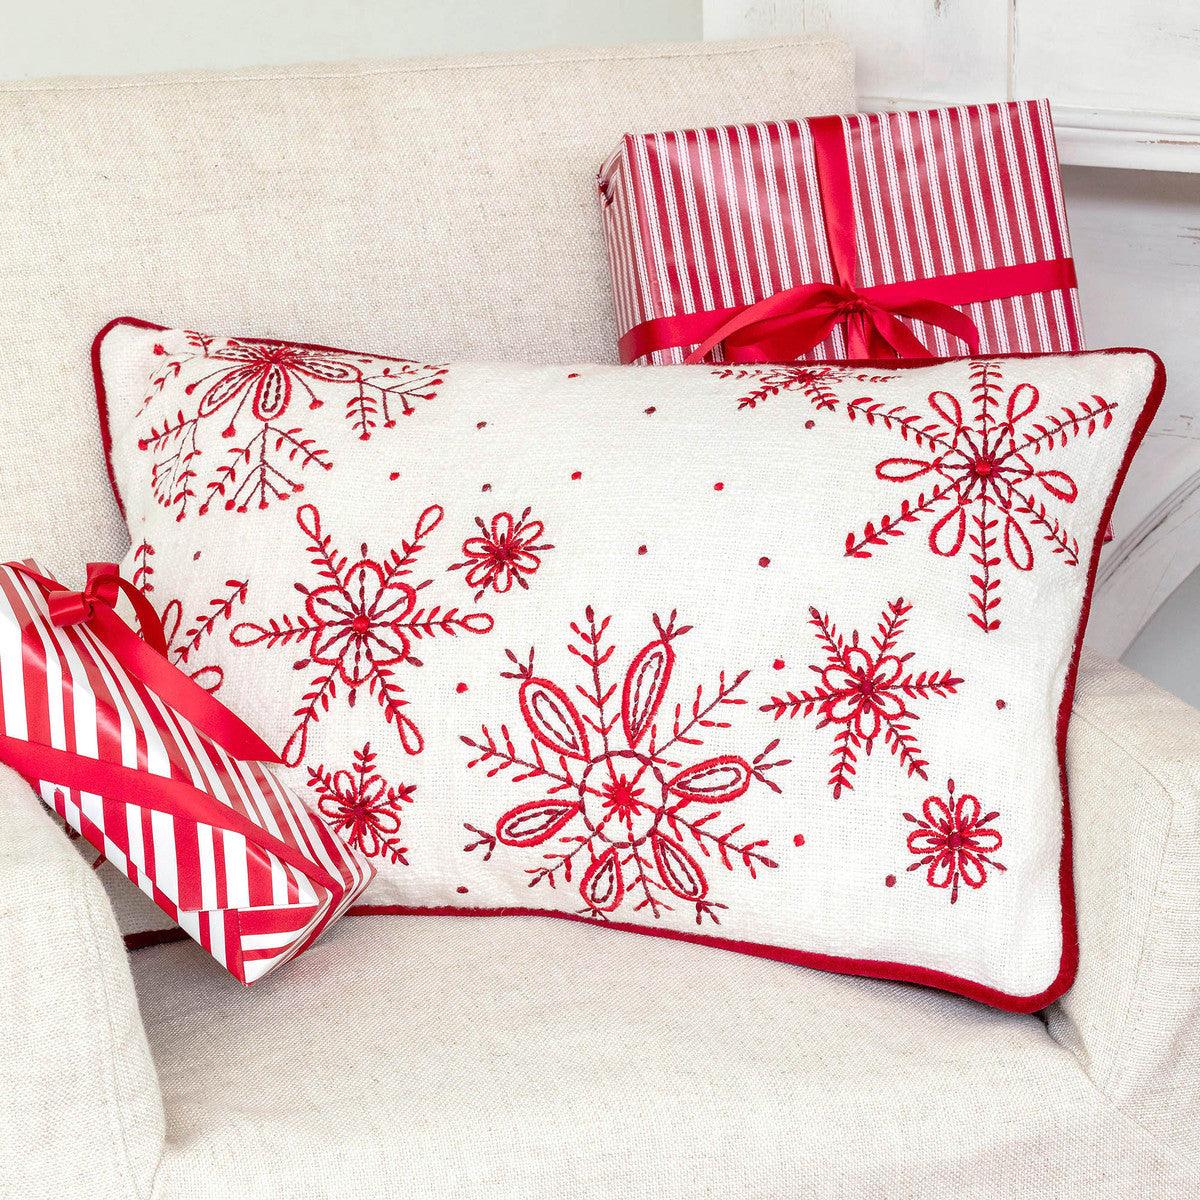 Snowflake Embroidered Cotton Pillow - Signastyle Boutique